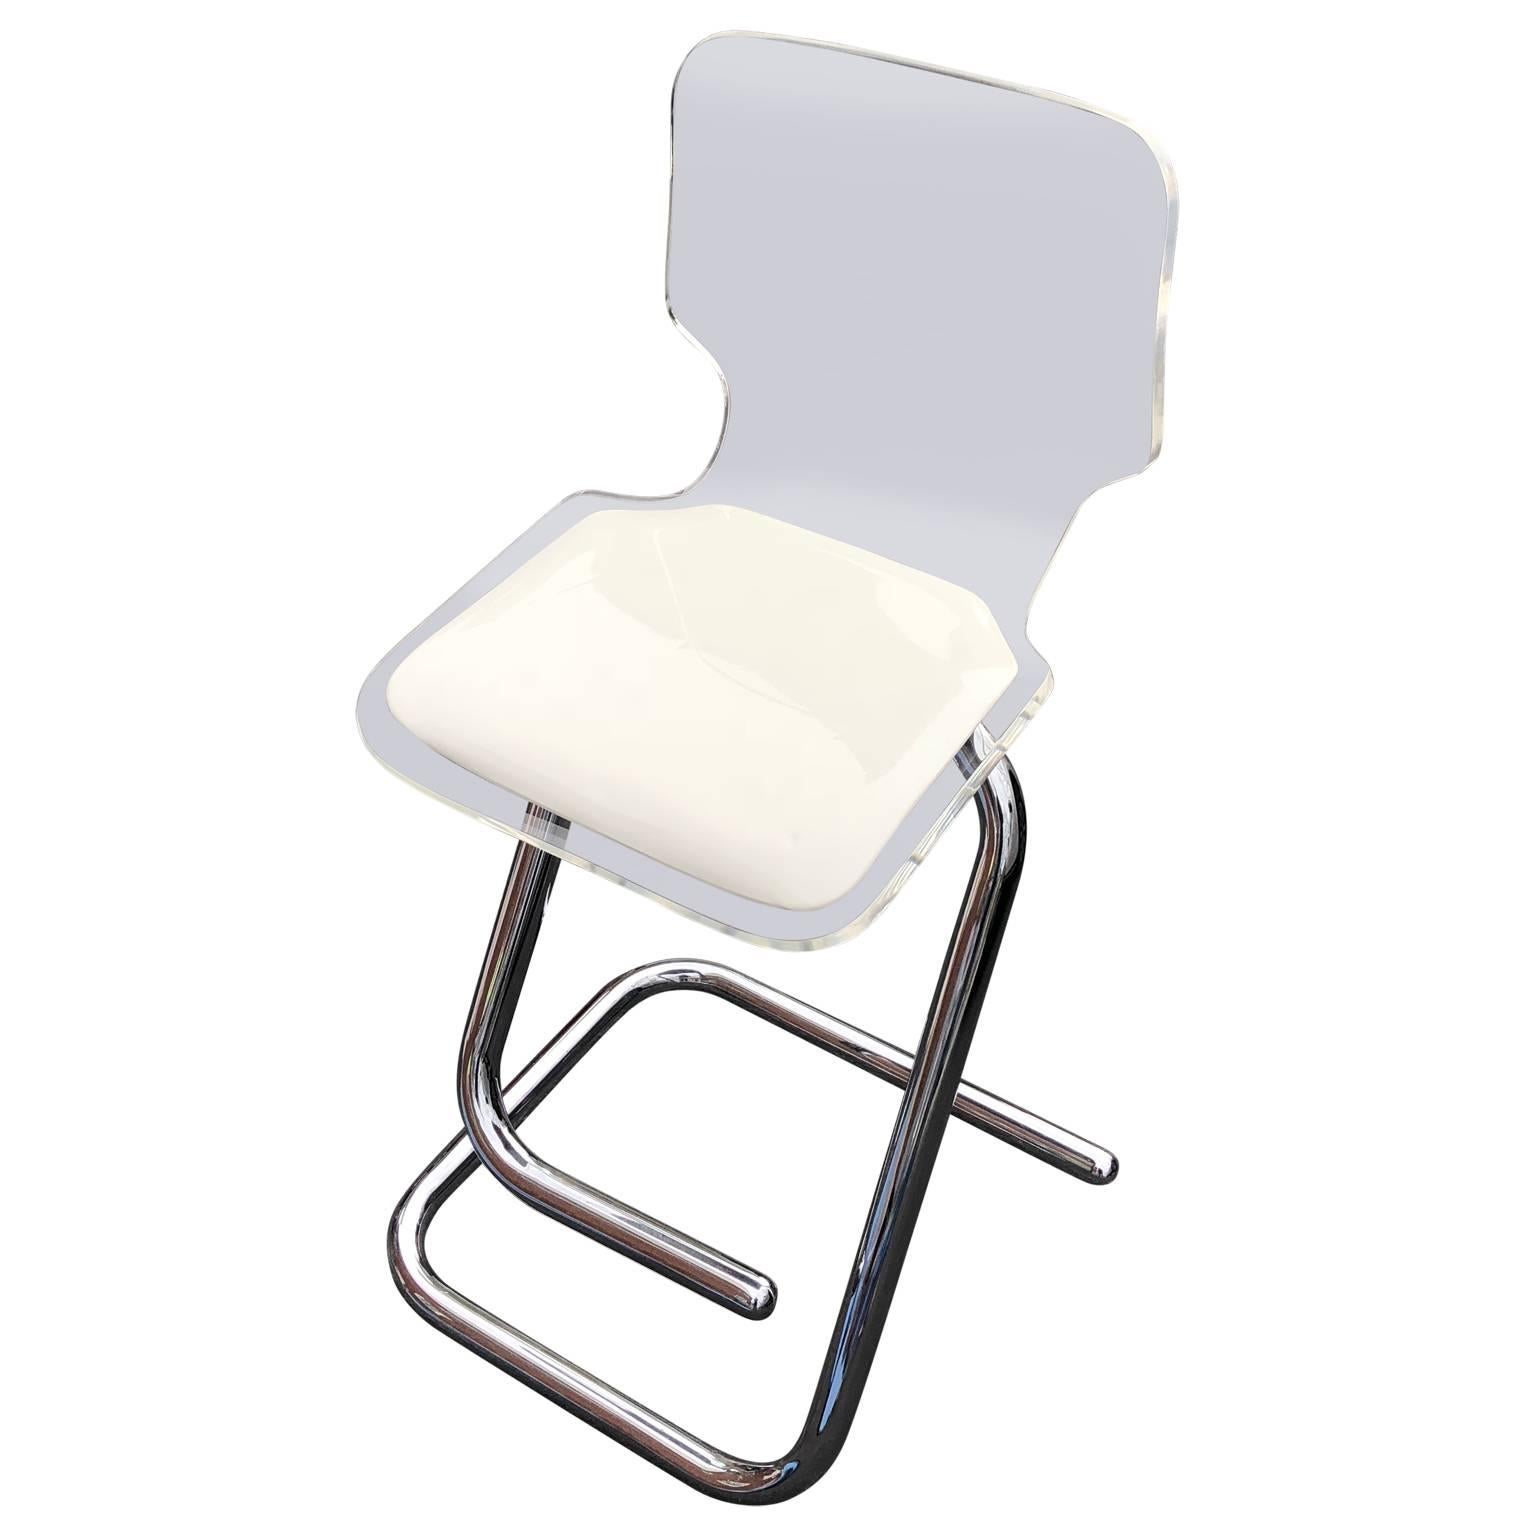 Single Luigi Bardini Lucite and chrome bar stool. The stool is in good sturdy condition and has the original white vinyl seat cover.
 
$125 flat rate front door delivery includes Washington DC metro, Baltimore and Philadelphia.